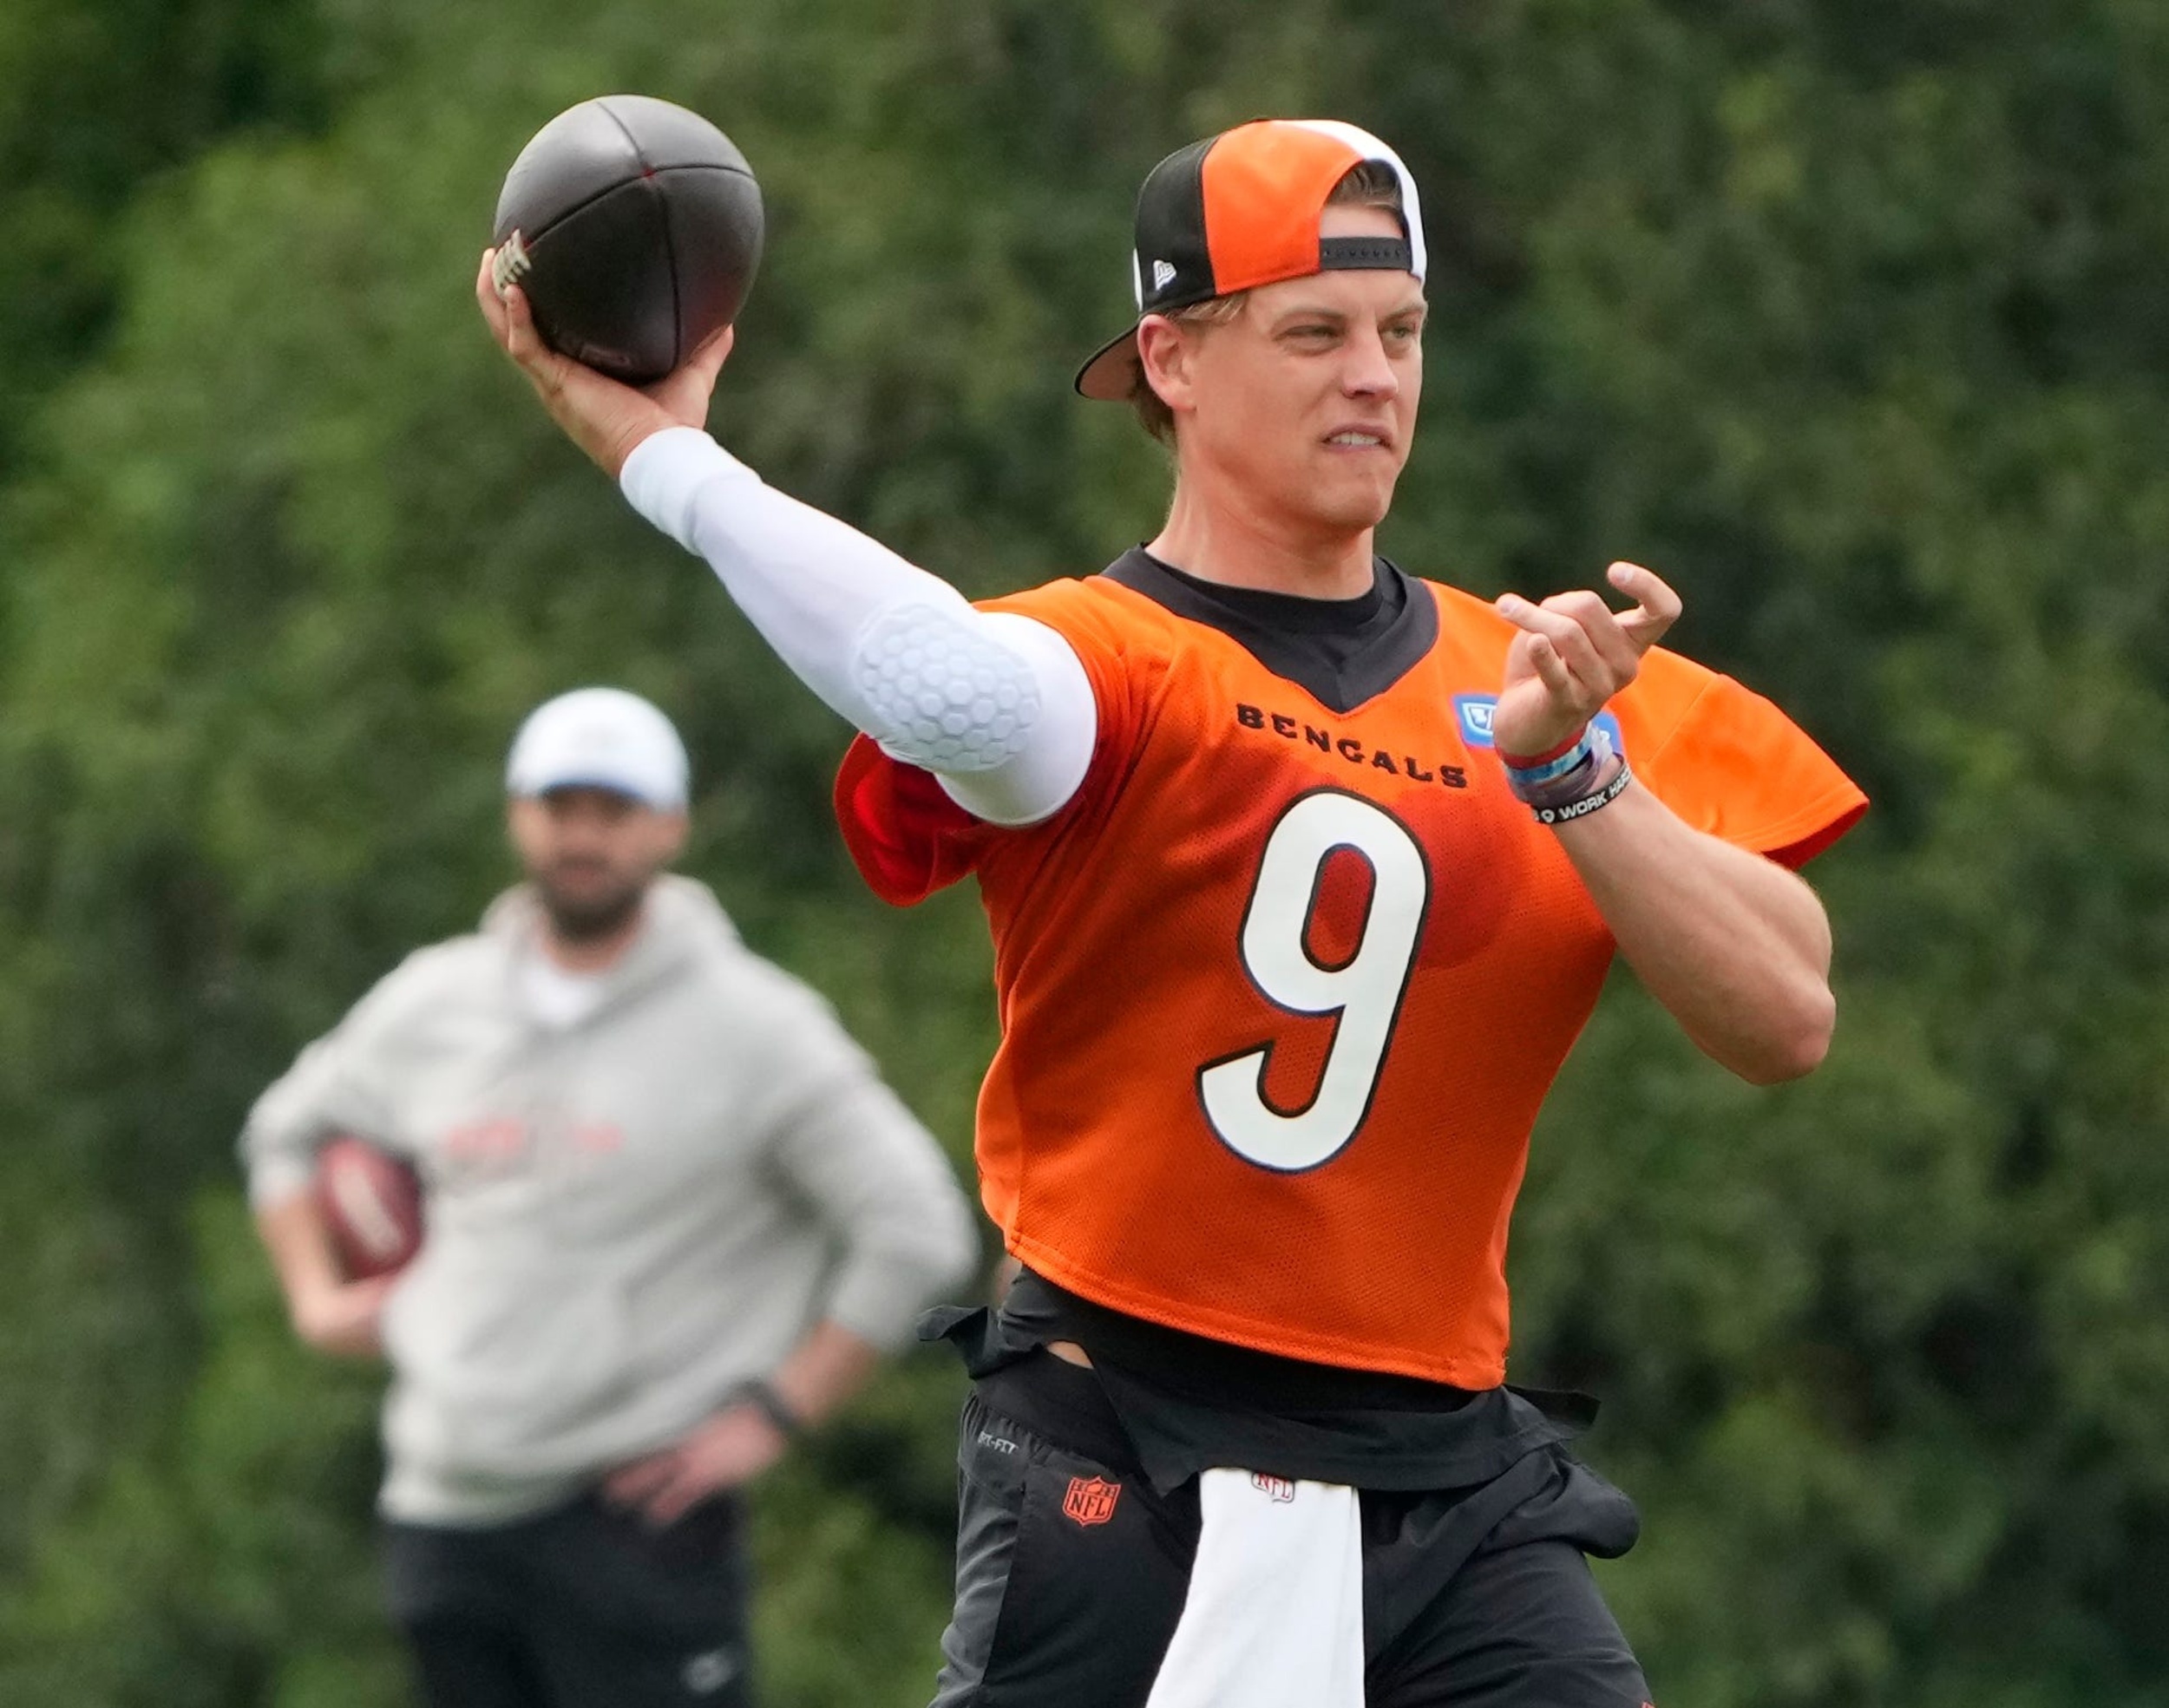 joe burrow shares 'support' for bengals who requested trades